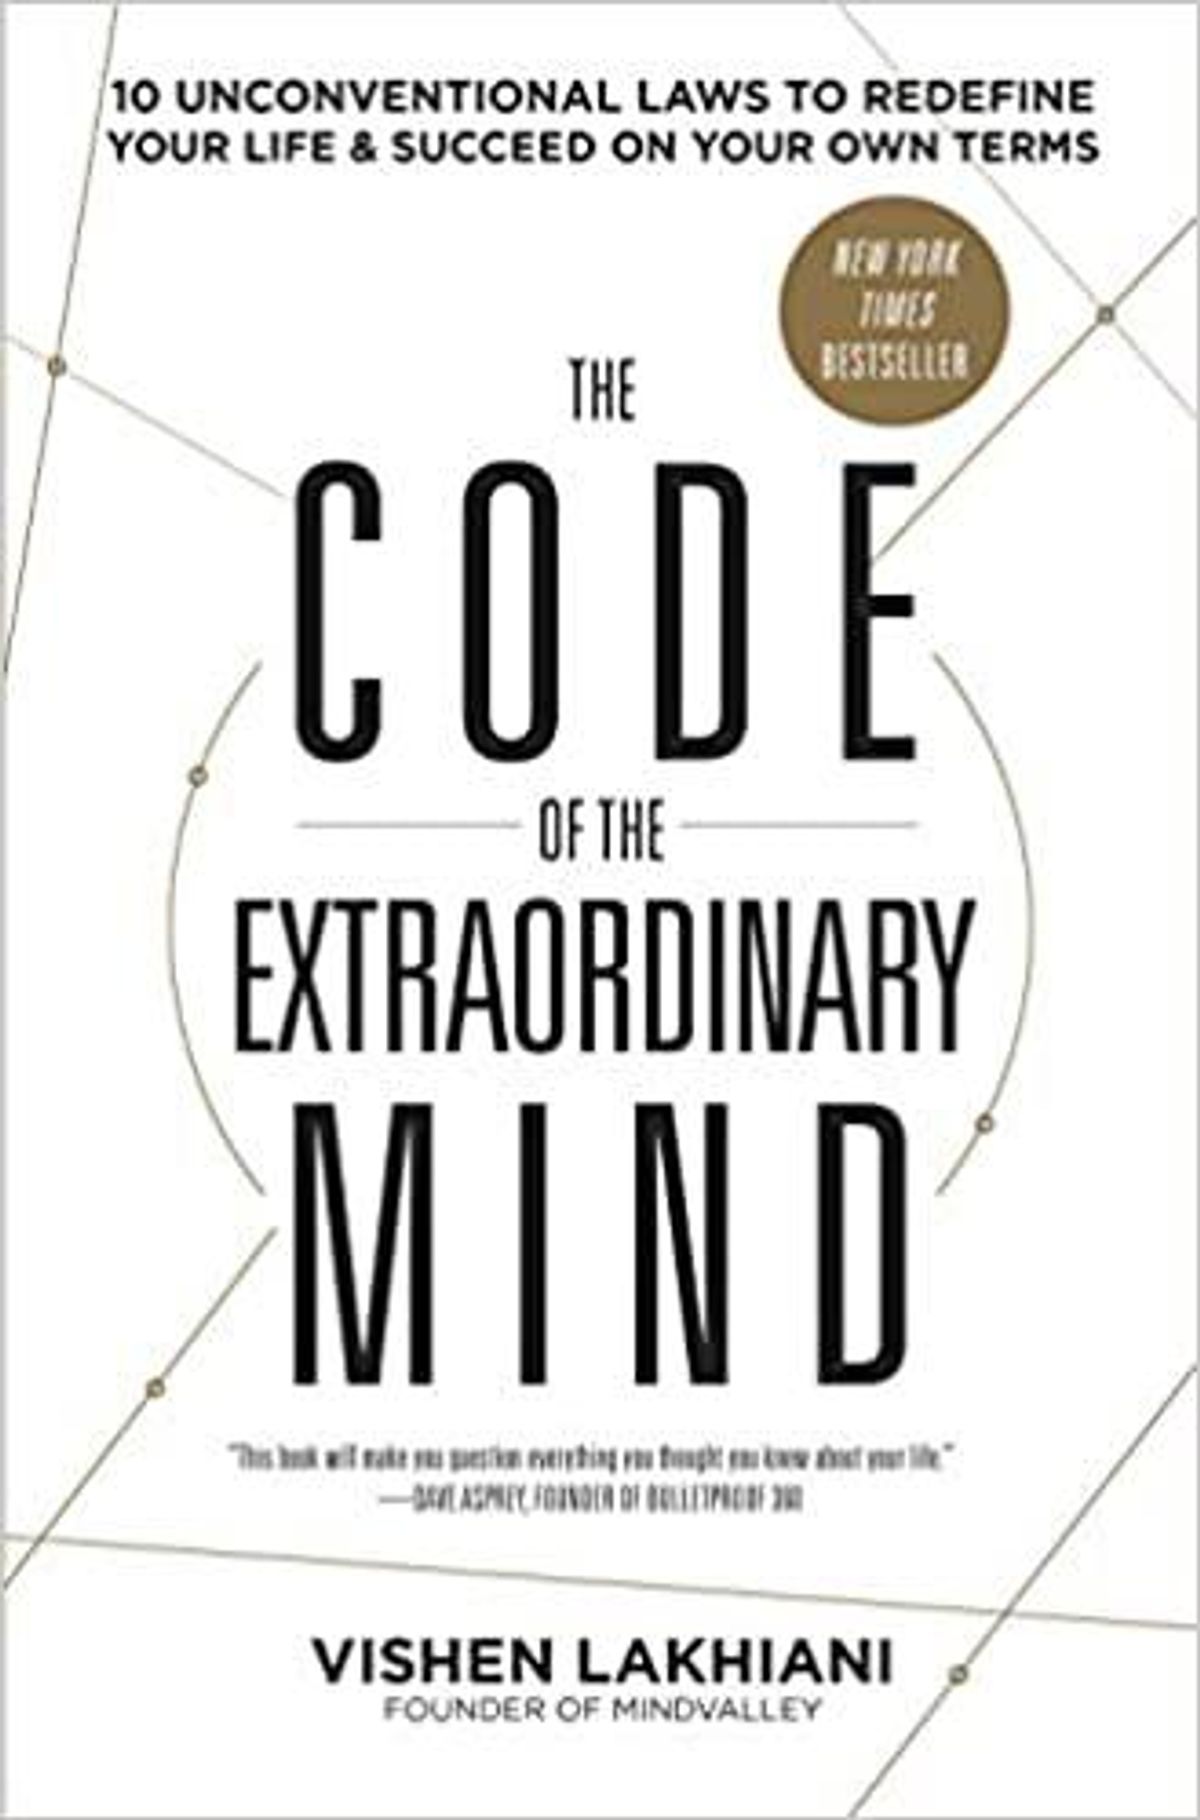 vishen lakhiani the code of the extraordinary mind 10 unconventional laws to redefine your life and succeed on your own terms